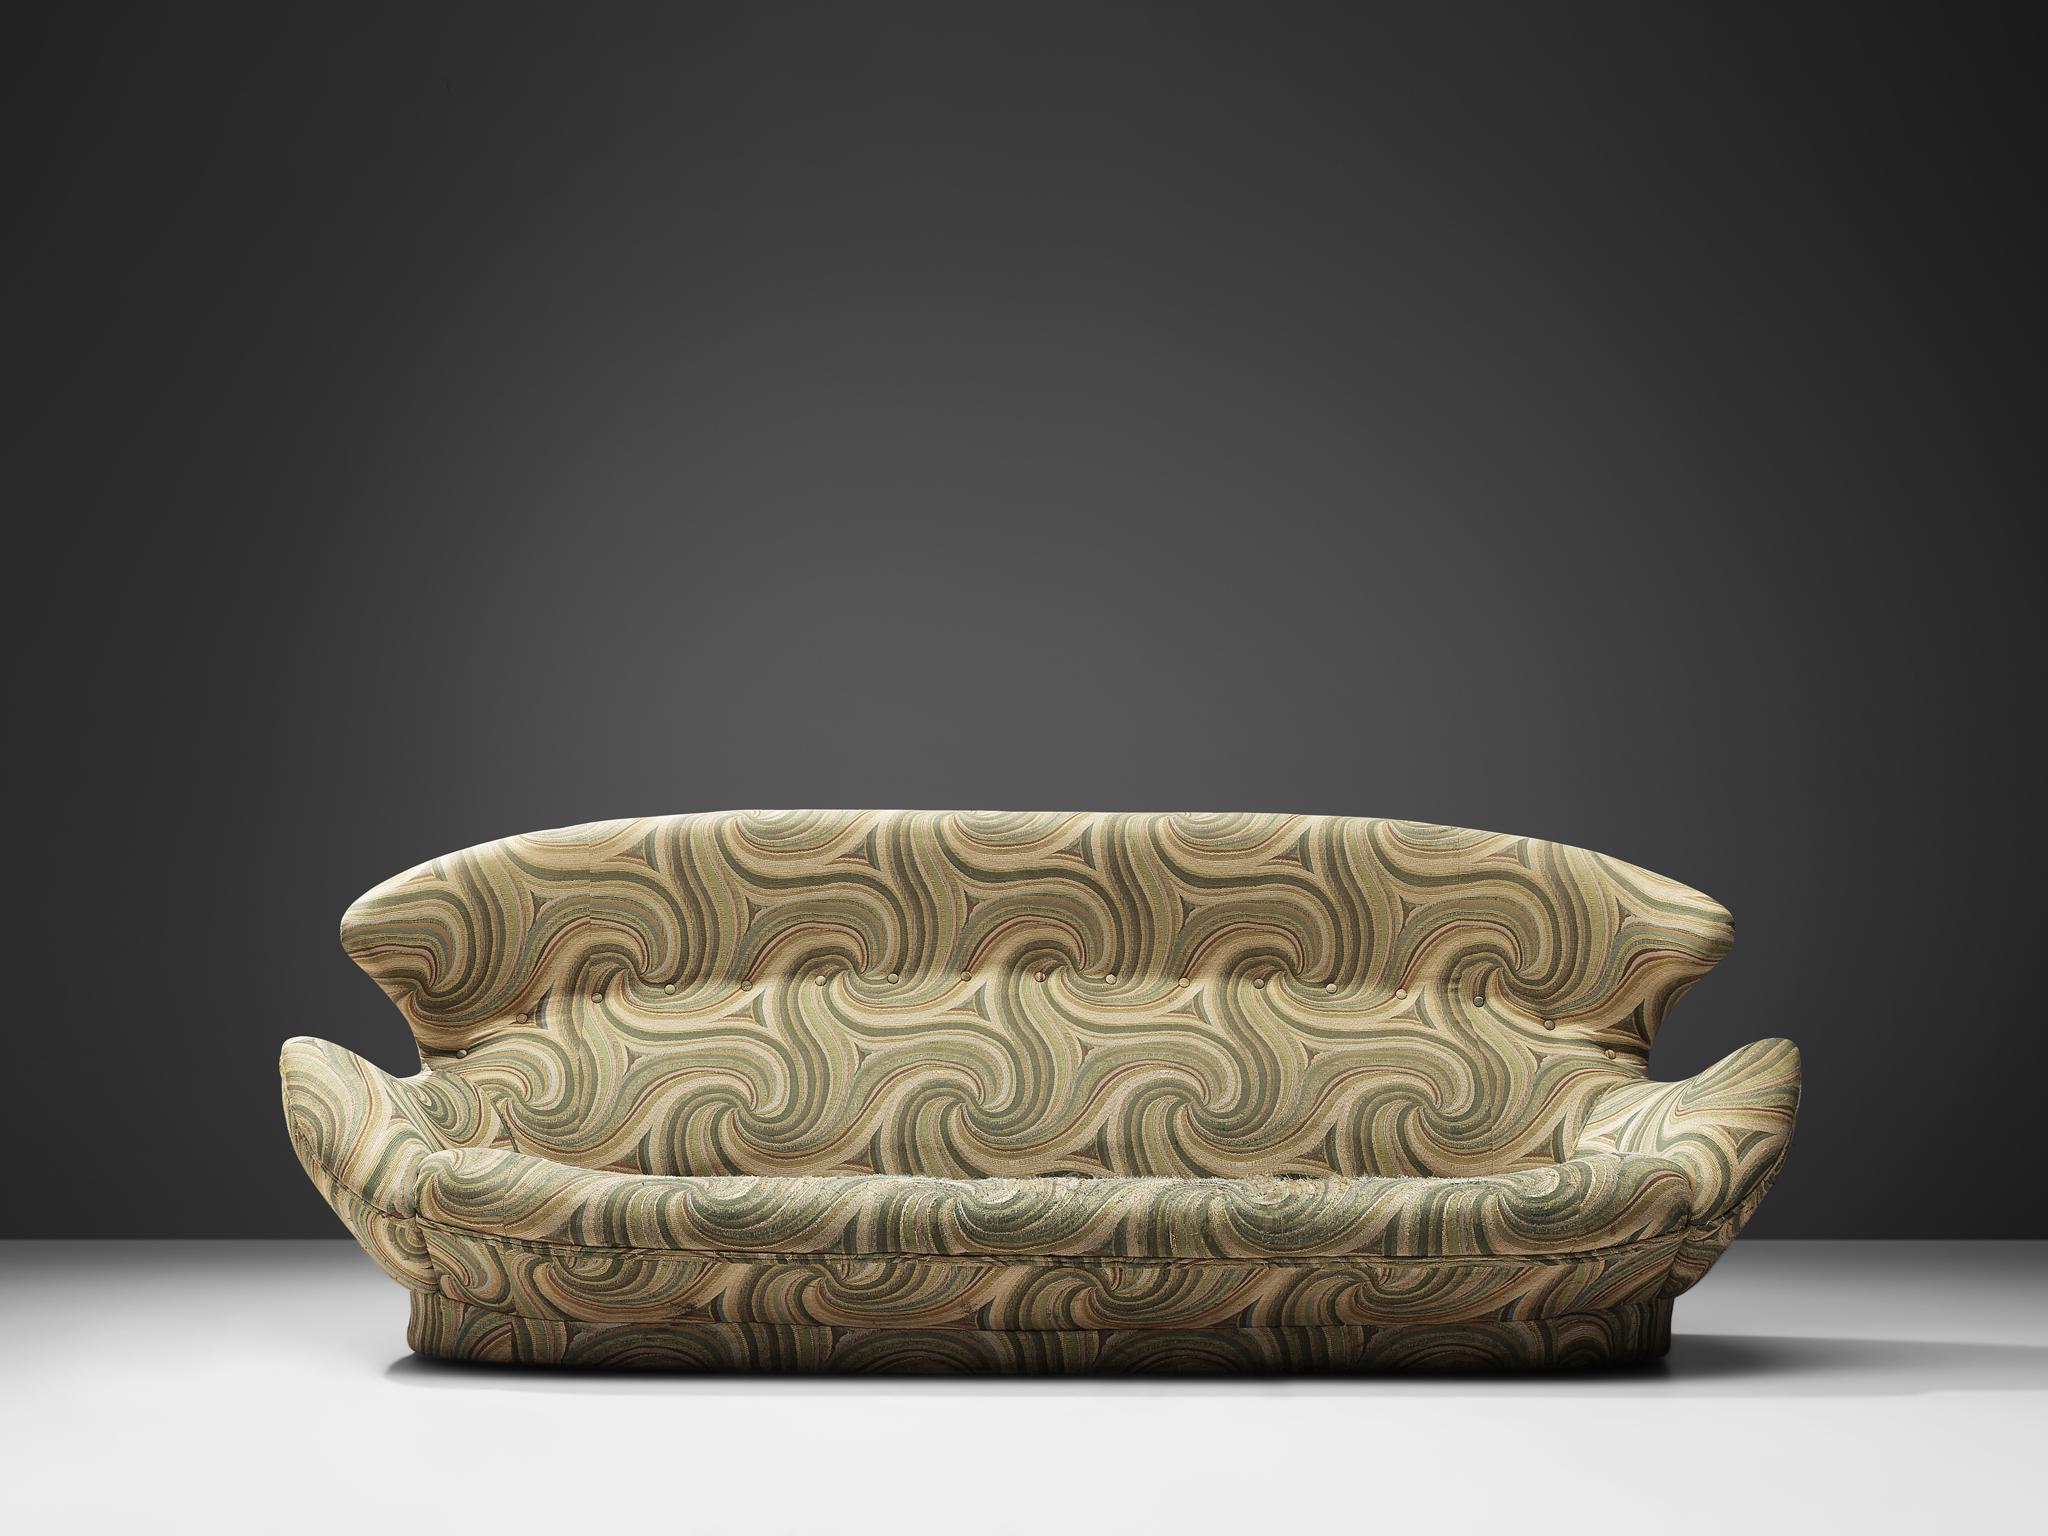 Two-seat sofa, green and cream patterned upholstery, Europe, 1970s.

Comfortable winged sofa with hypnotizing and decorative patterned upholstery. The rounded overall shape of the sofa, with the wings reaching towards the armrests, ensures that the